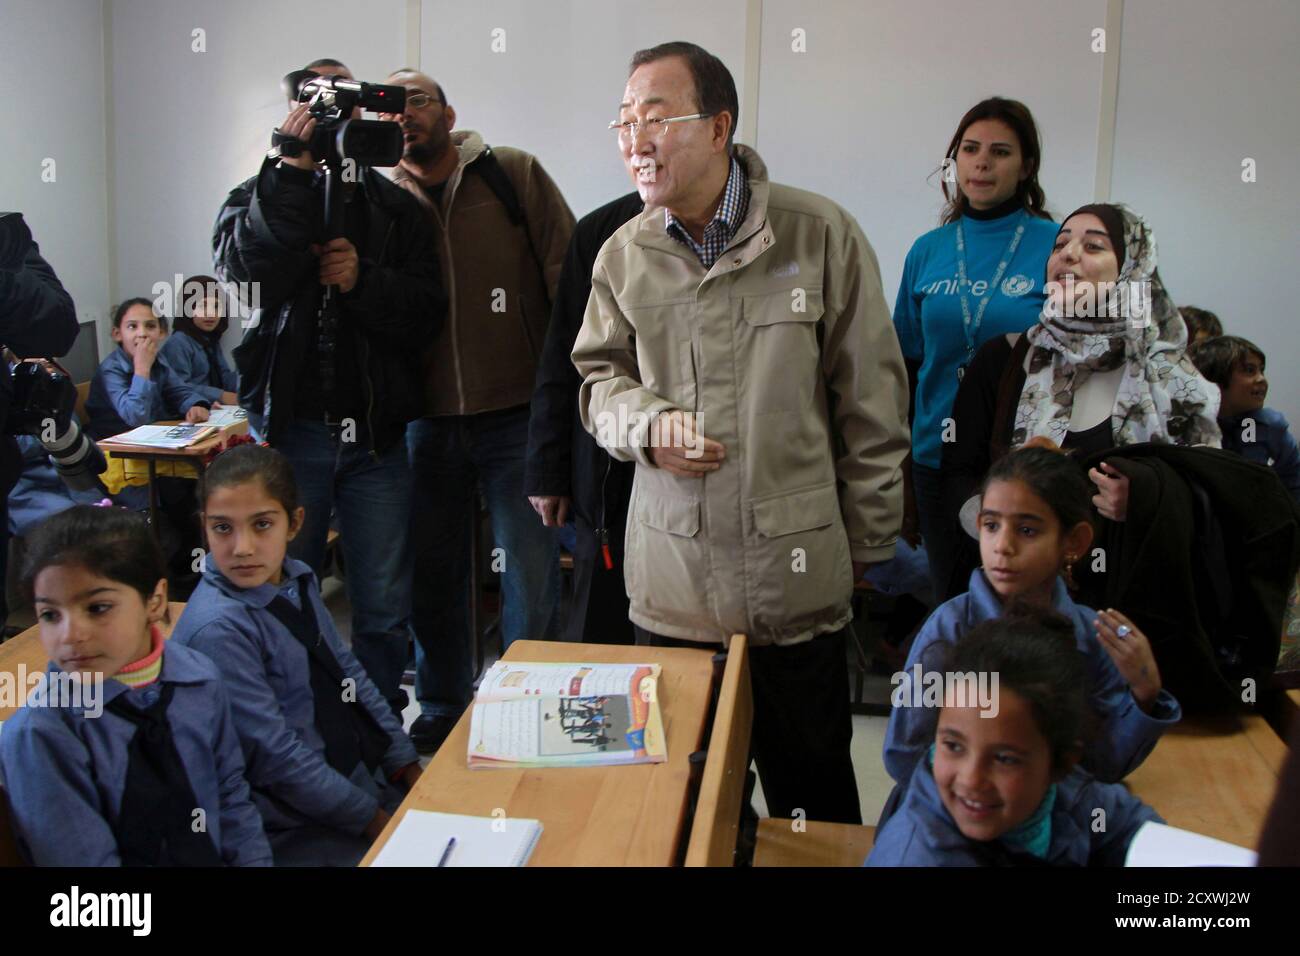 Jordan School Children High Resolution Stock Photography and Images - Alamy